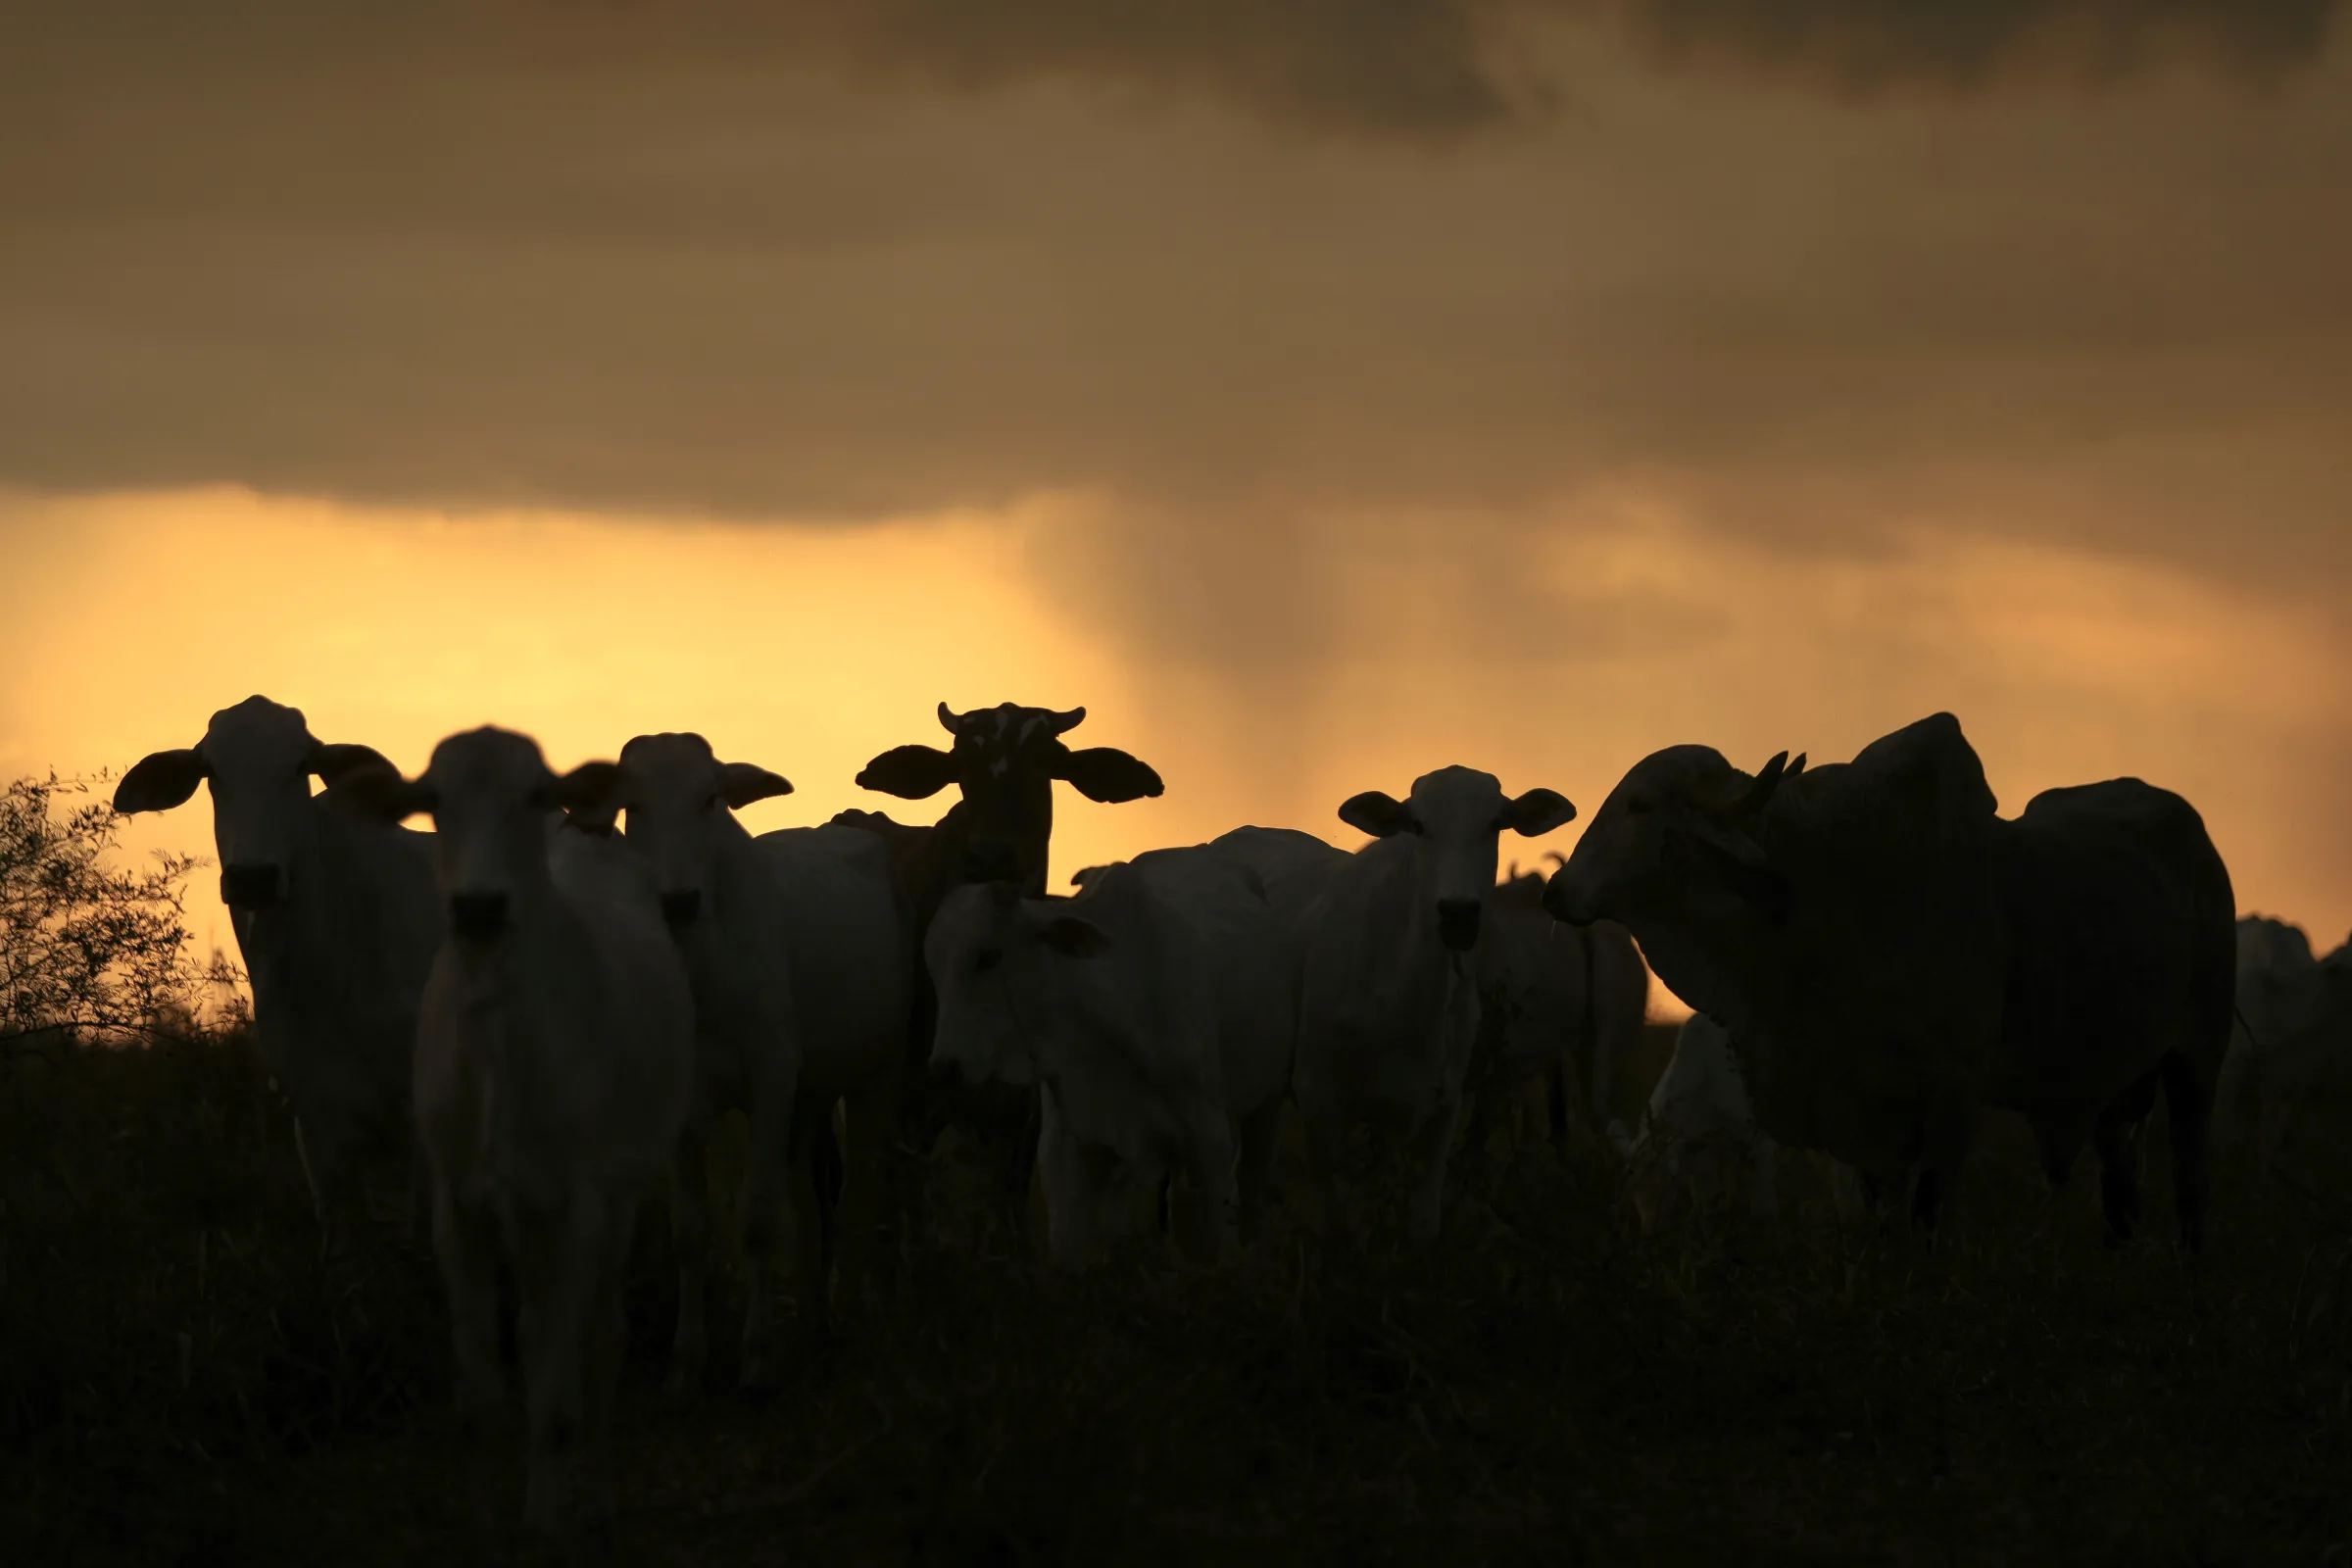 A herd of cows is silhouetted against an orange sky